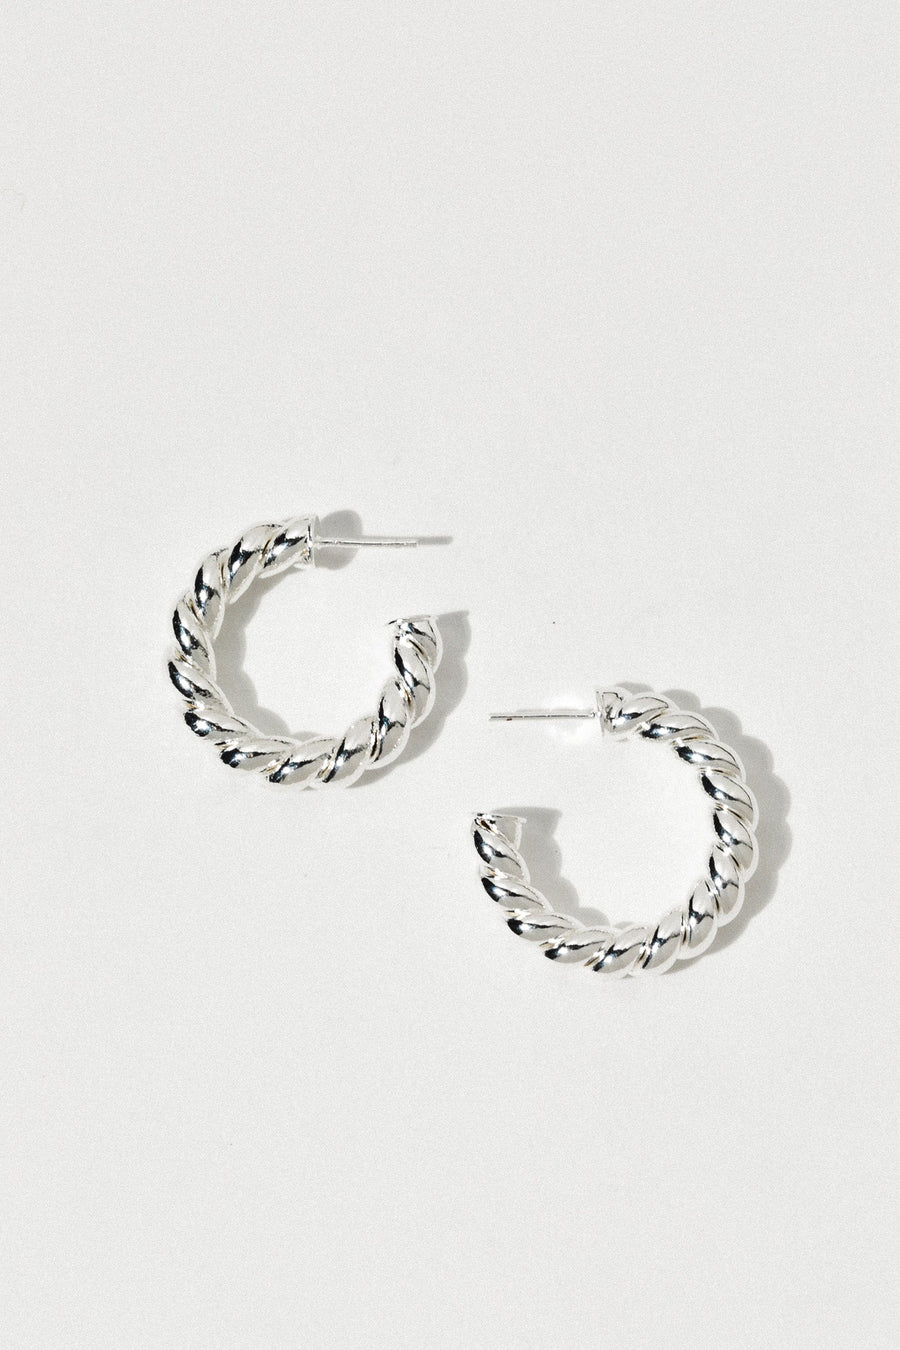 Child of Wild Jewelry Silver / Large Large Twisted Sister Hoops .:. Silver